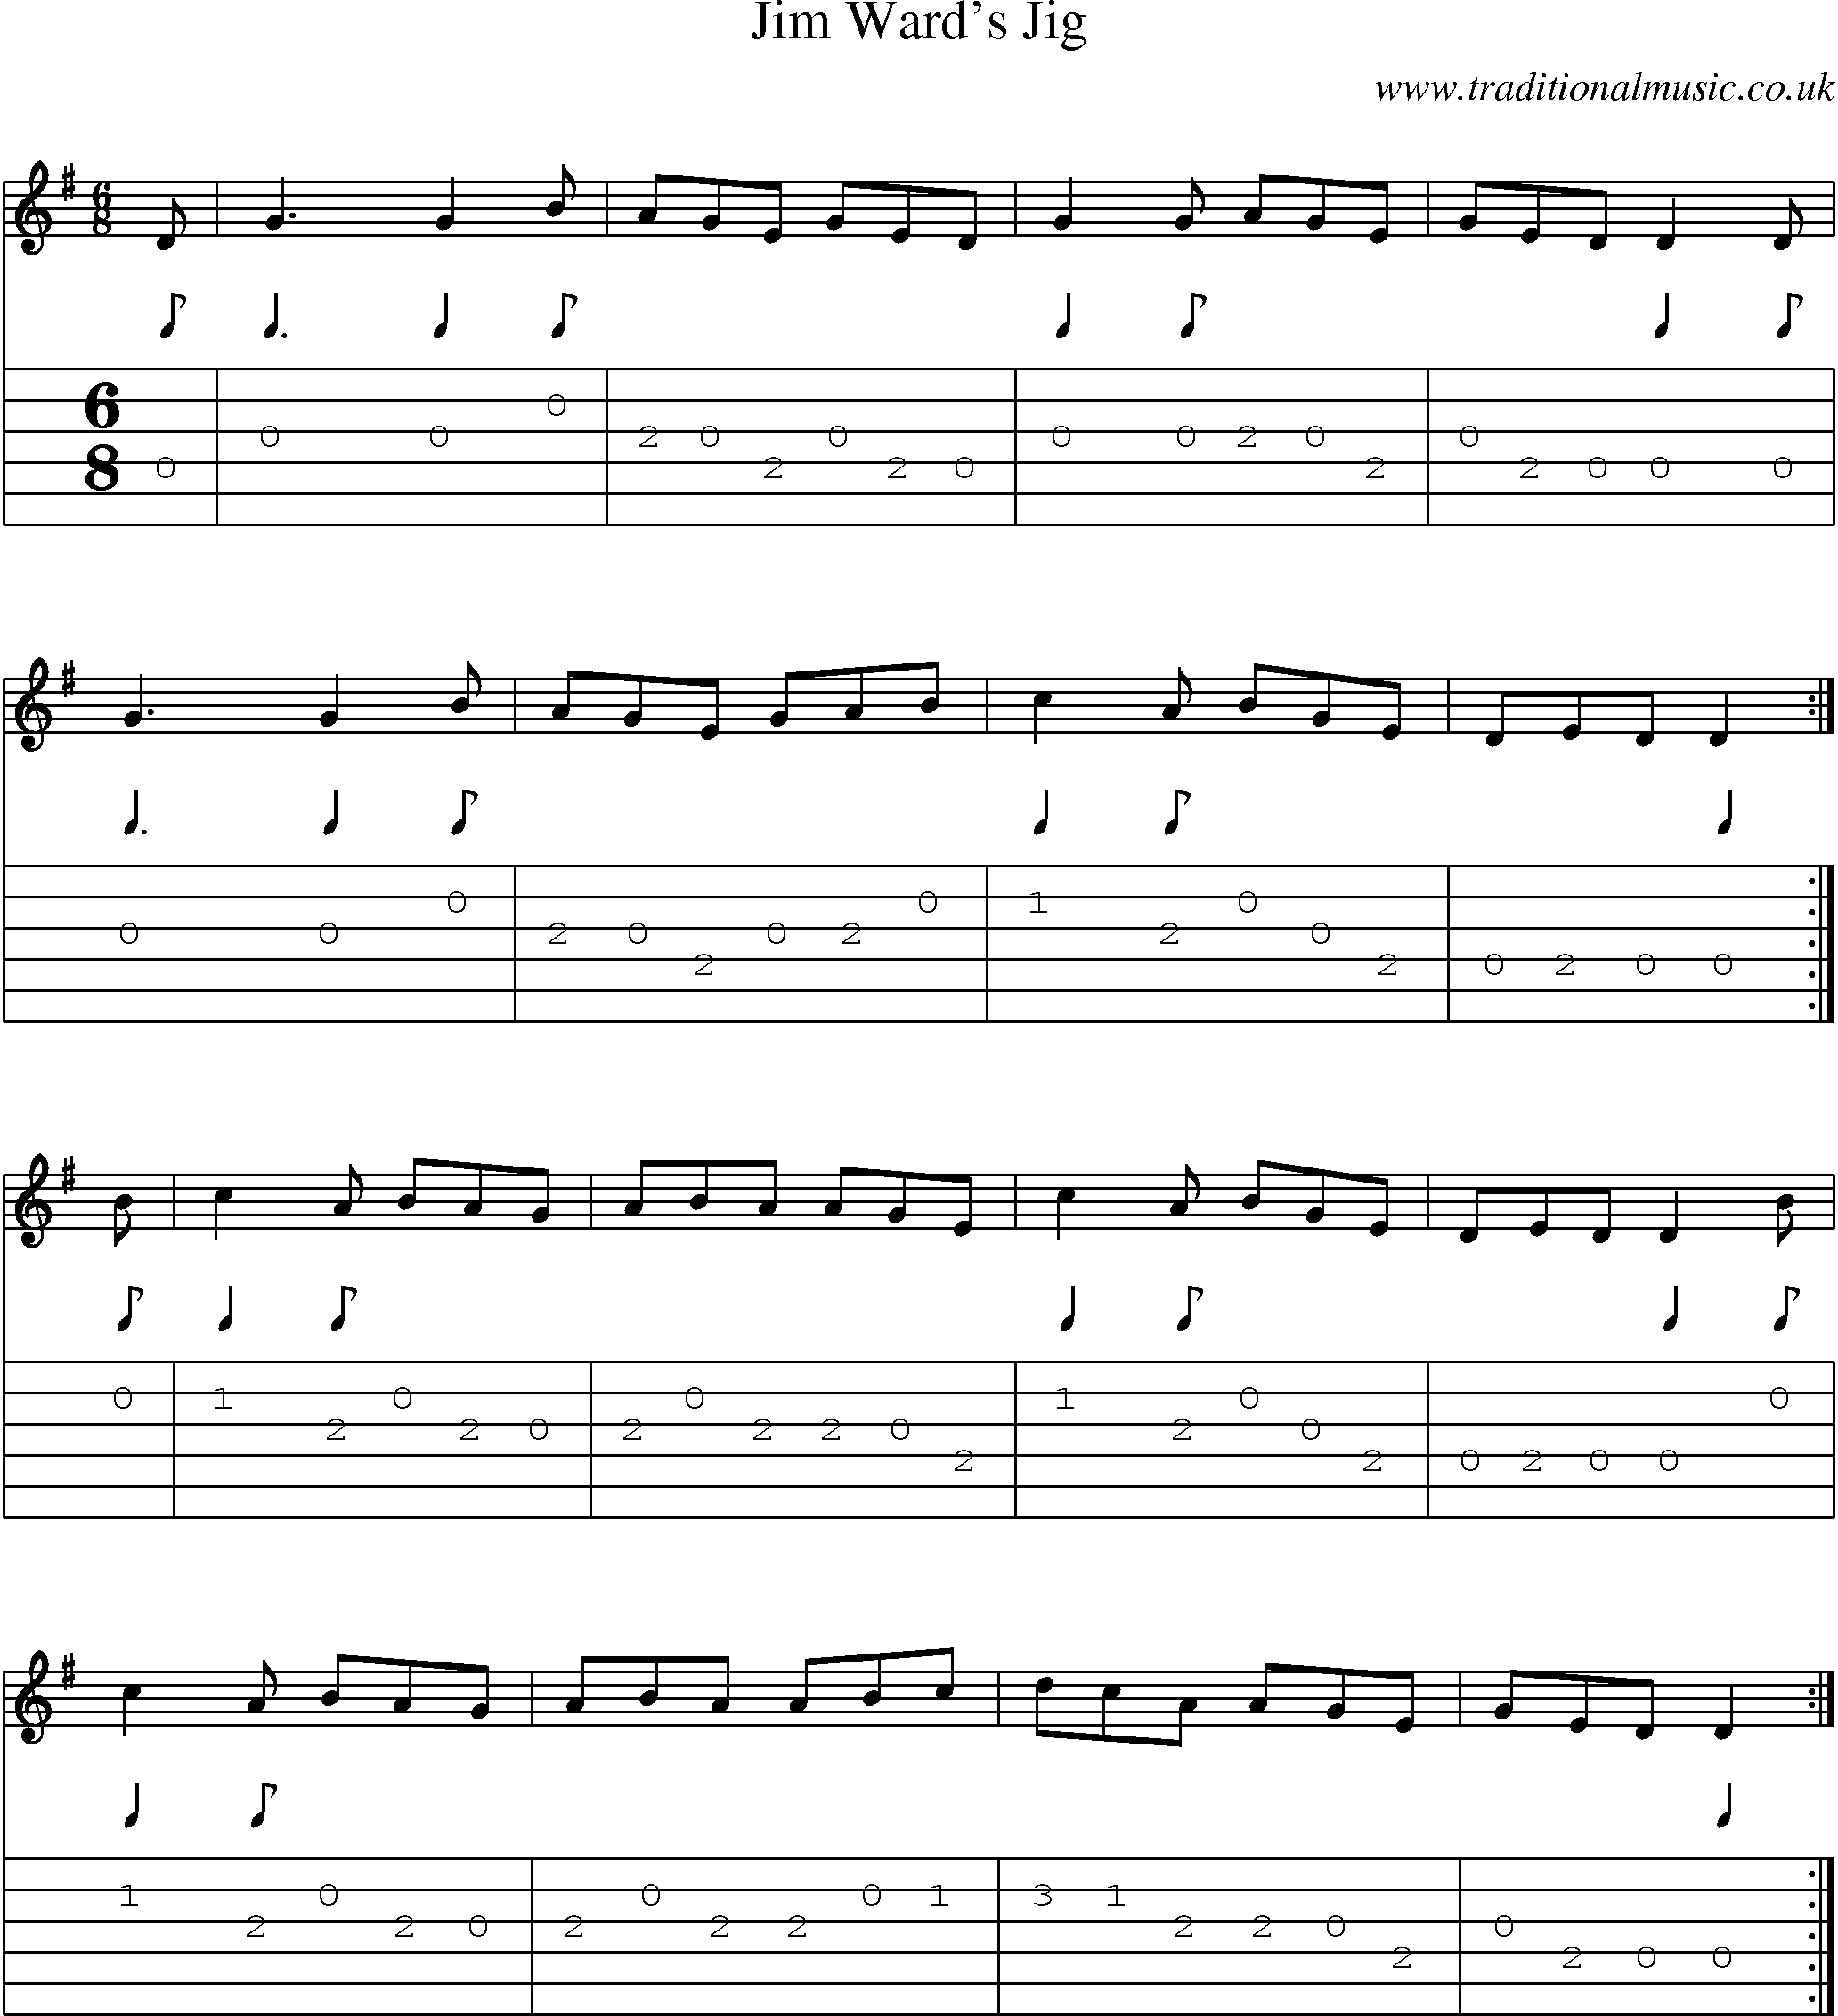 Music Score and Guitar Tabs for Jim Wards Jig